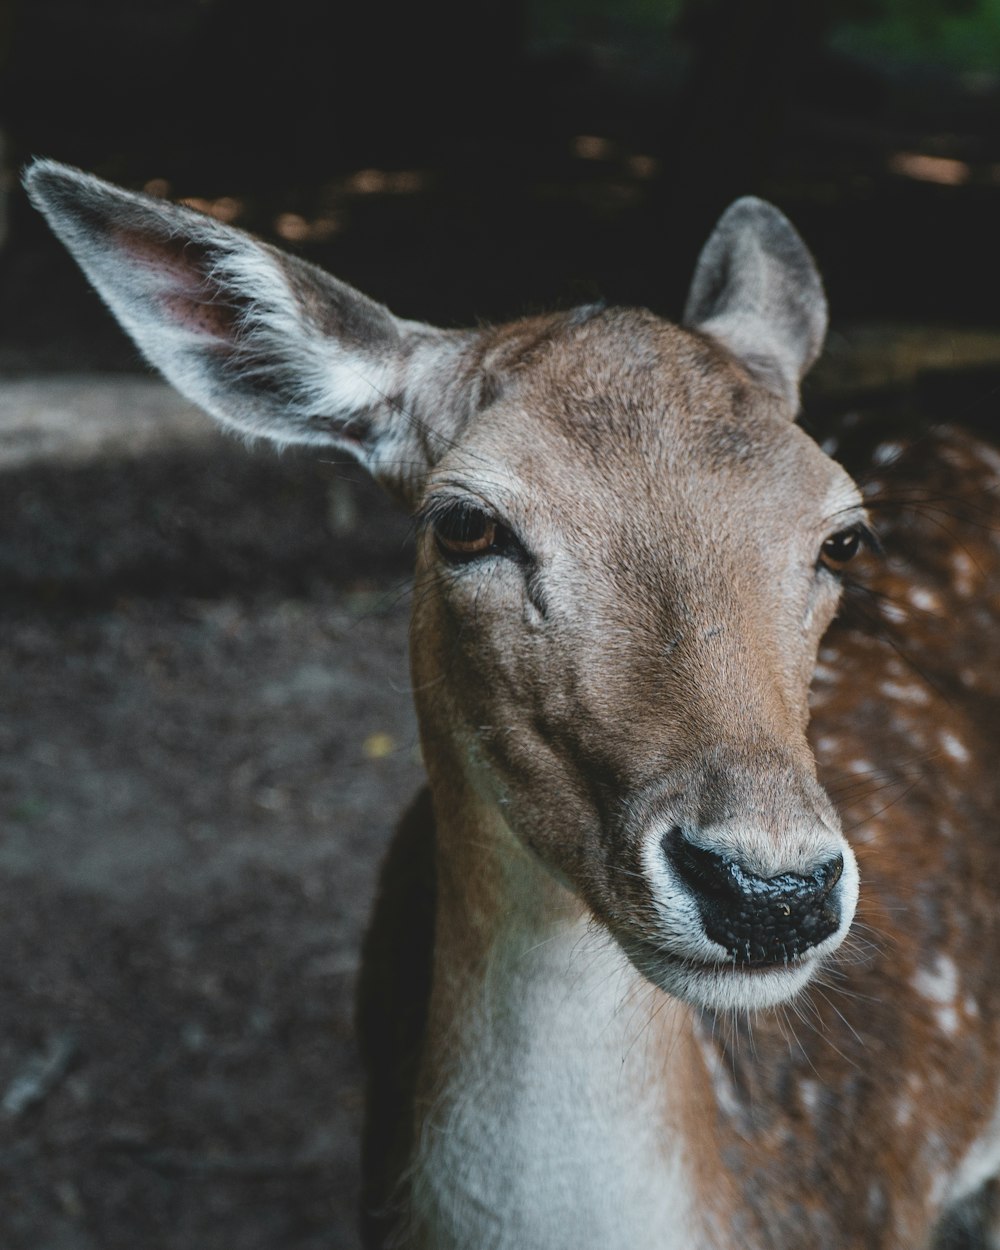 brown deer in close up photography